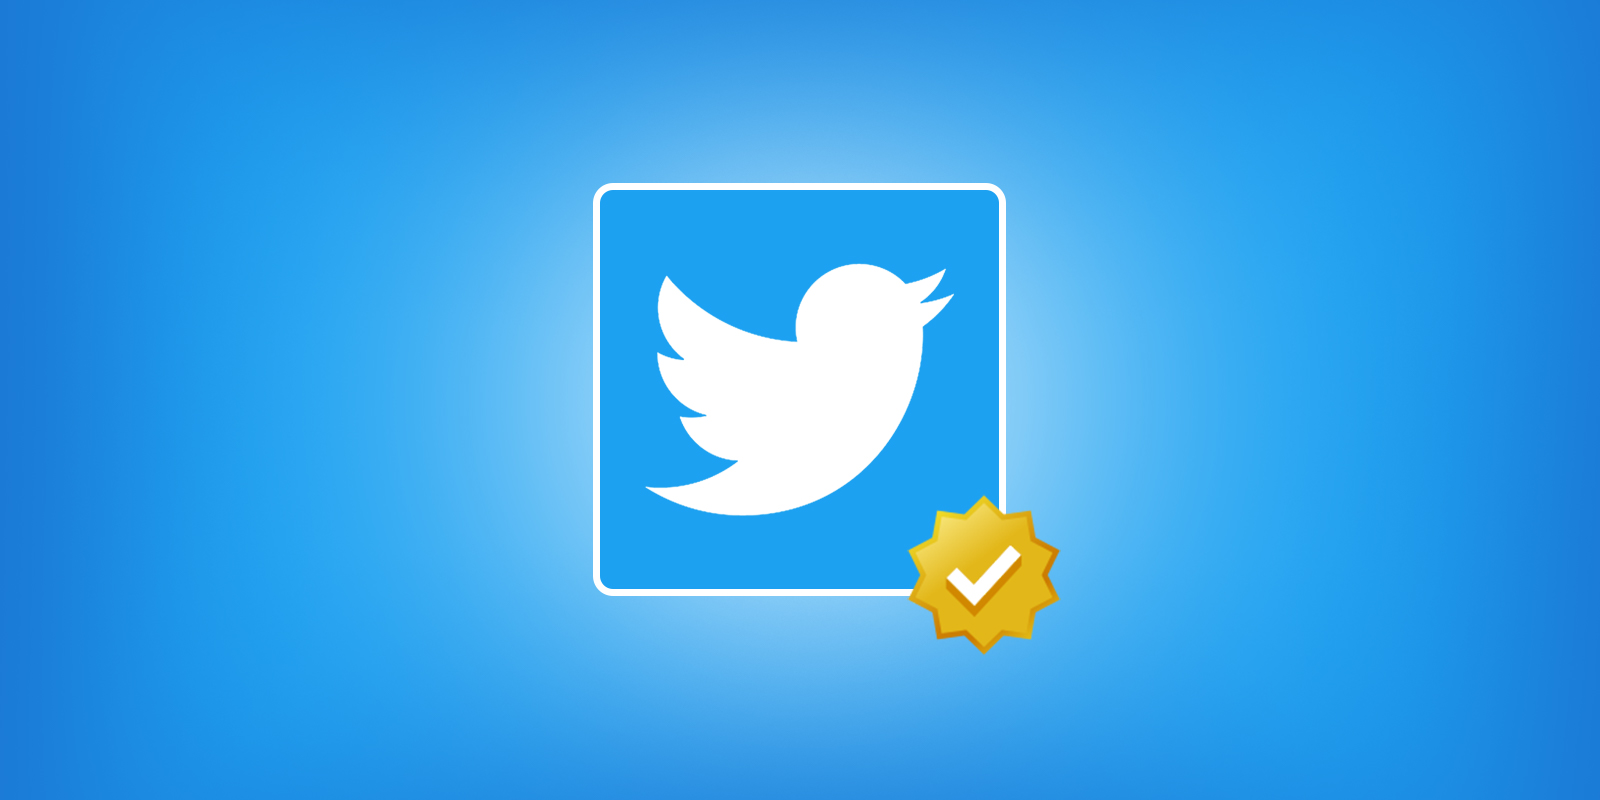 Twitter May Charge Brands $1,000 To Retain Their Gold Verified Badge